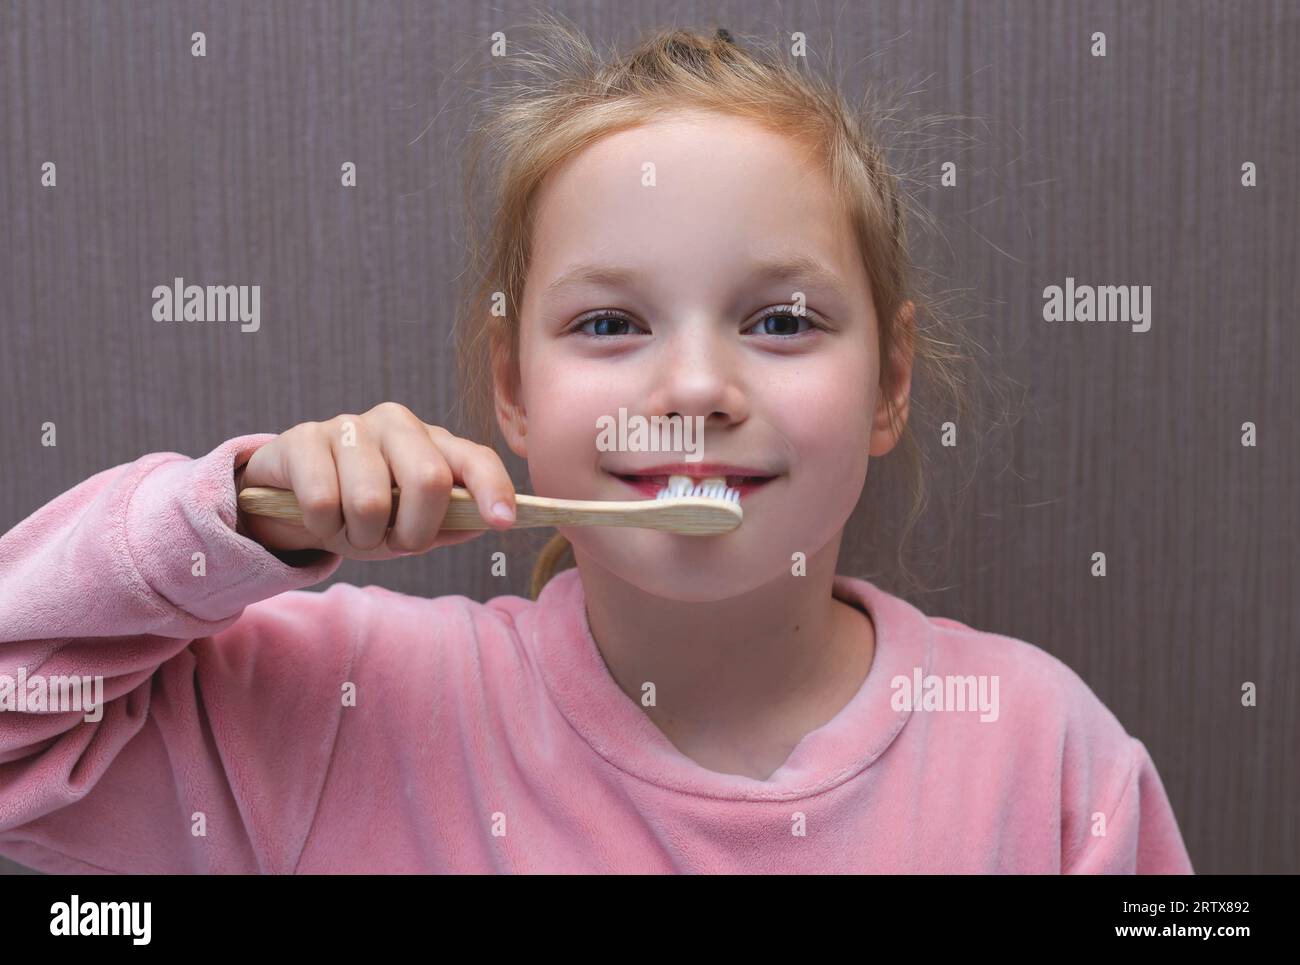 Little girl brushing her teeth. Girl with a toothbrush. Oral hygiene. Stock Photo